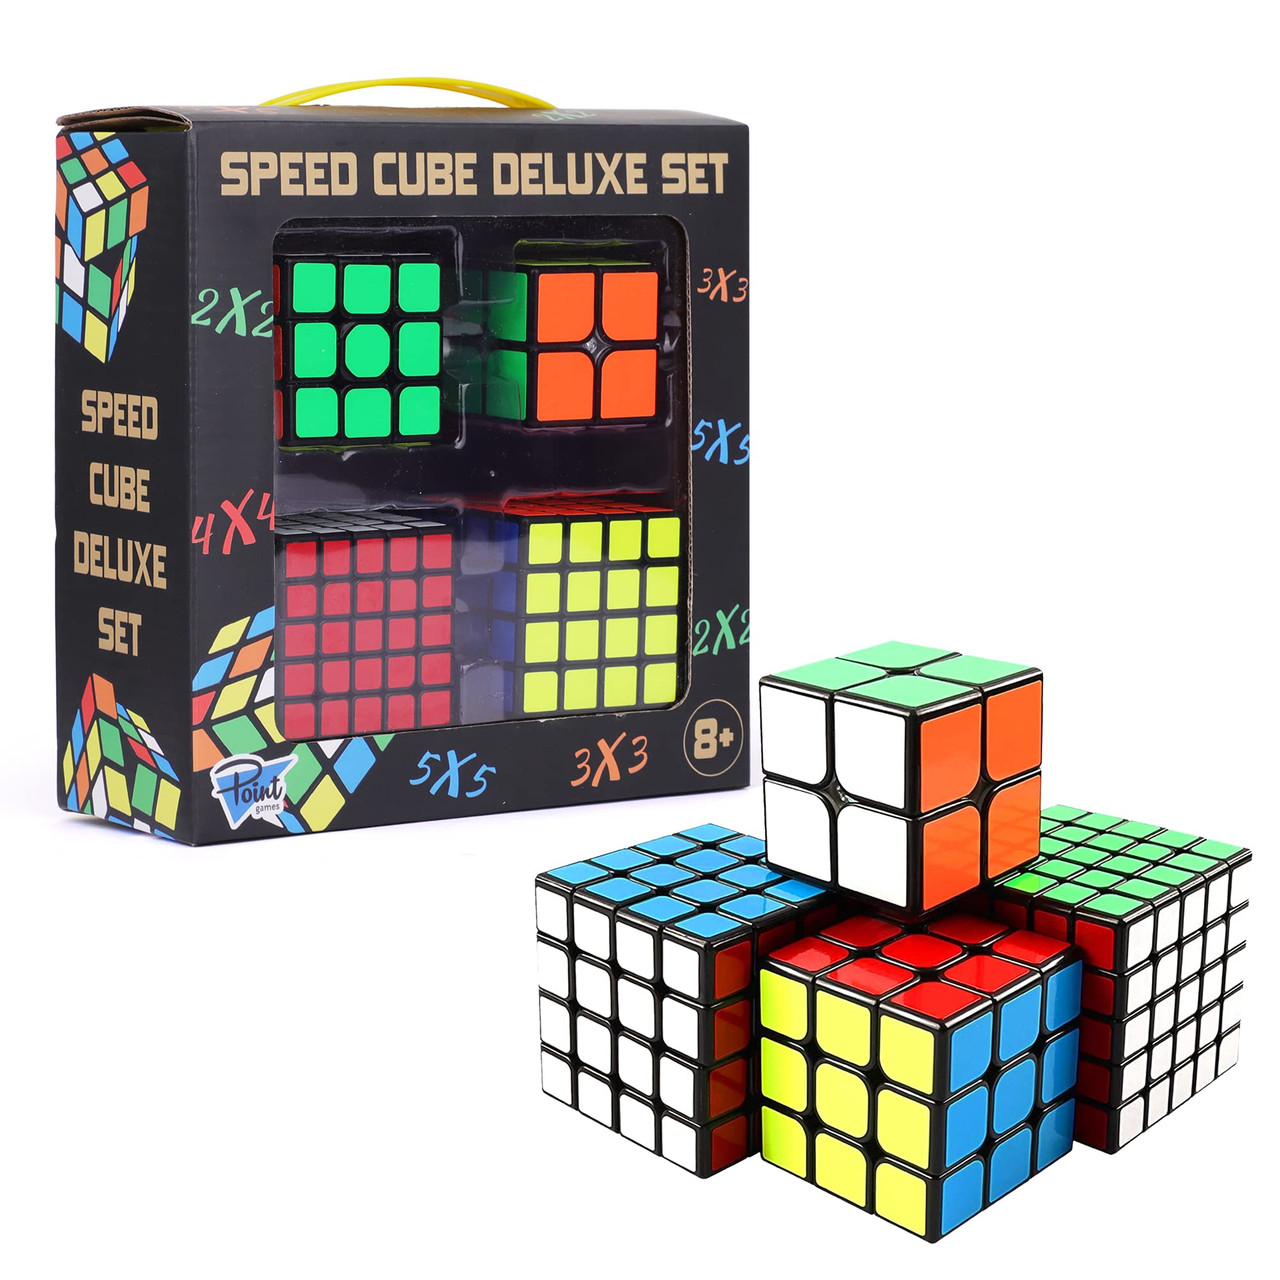 Cube Master 2048 by Fun Master